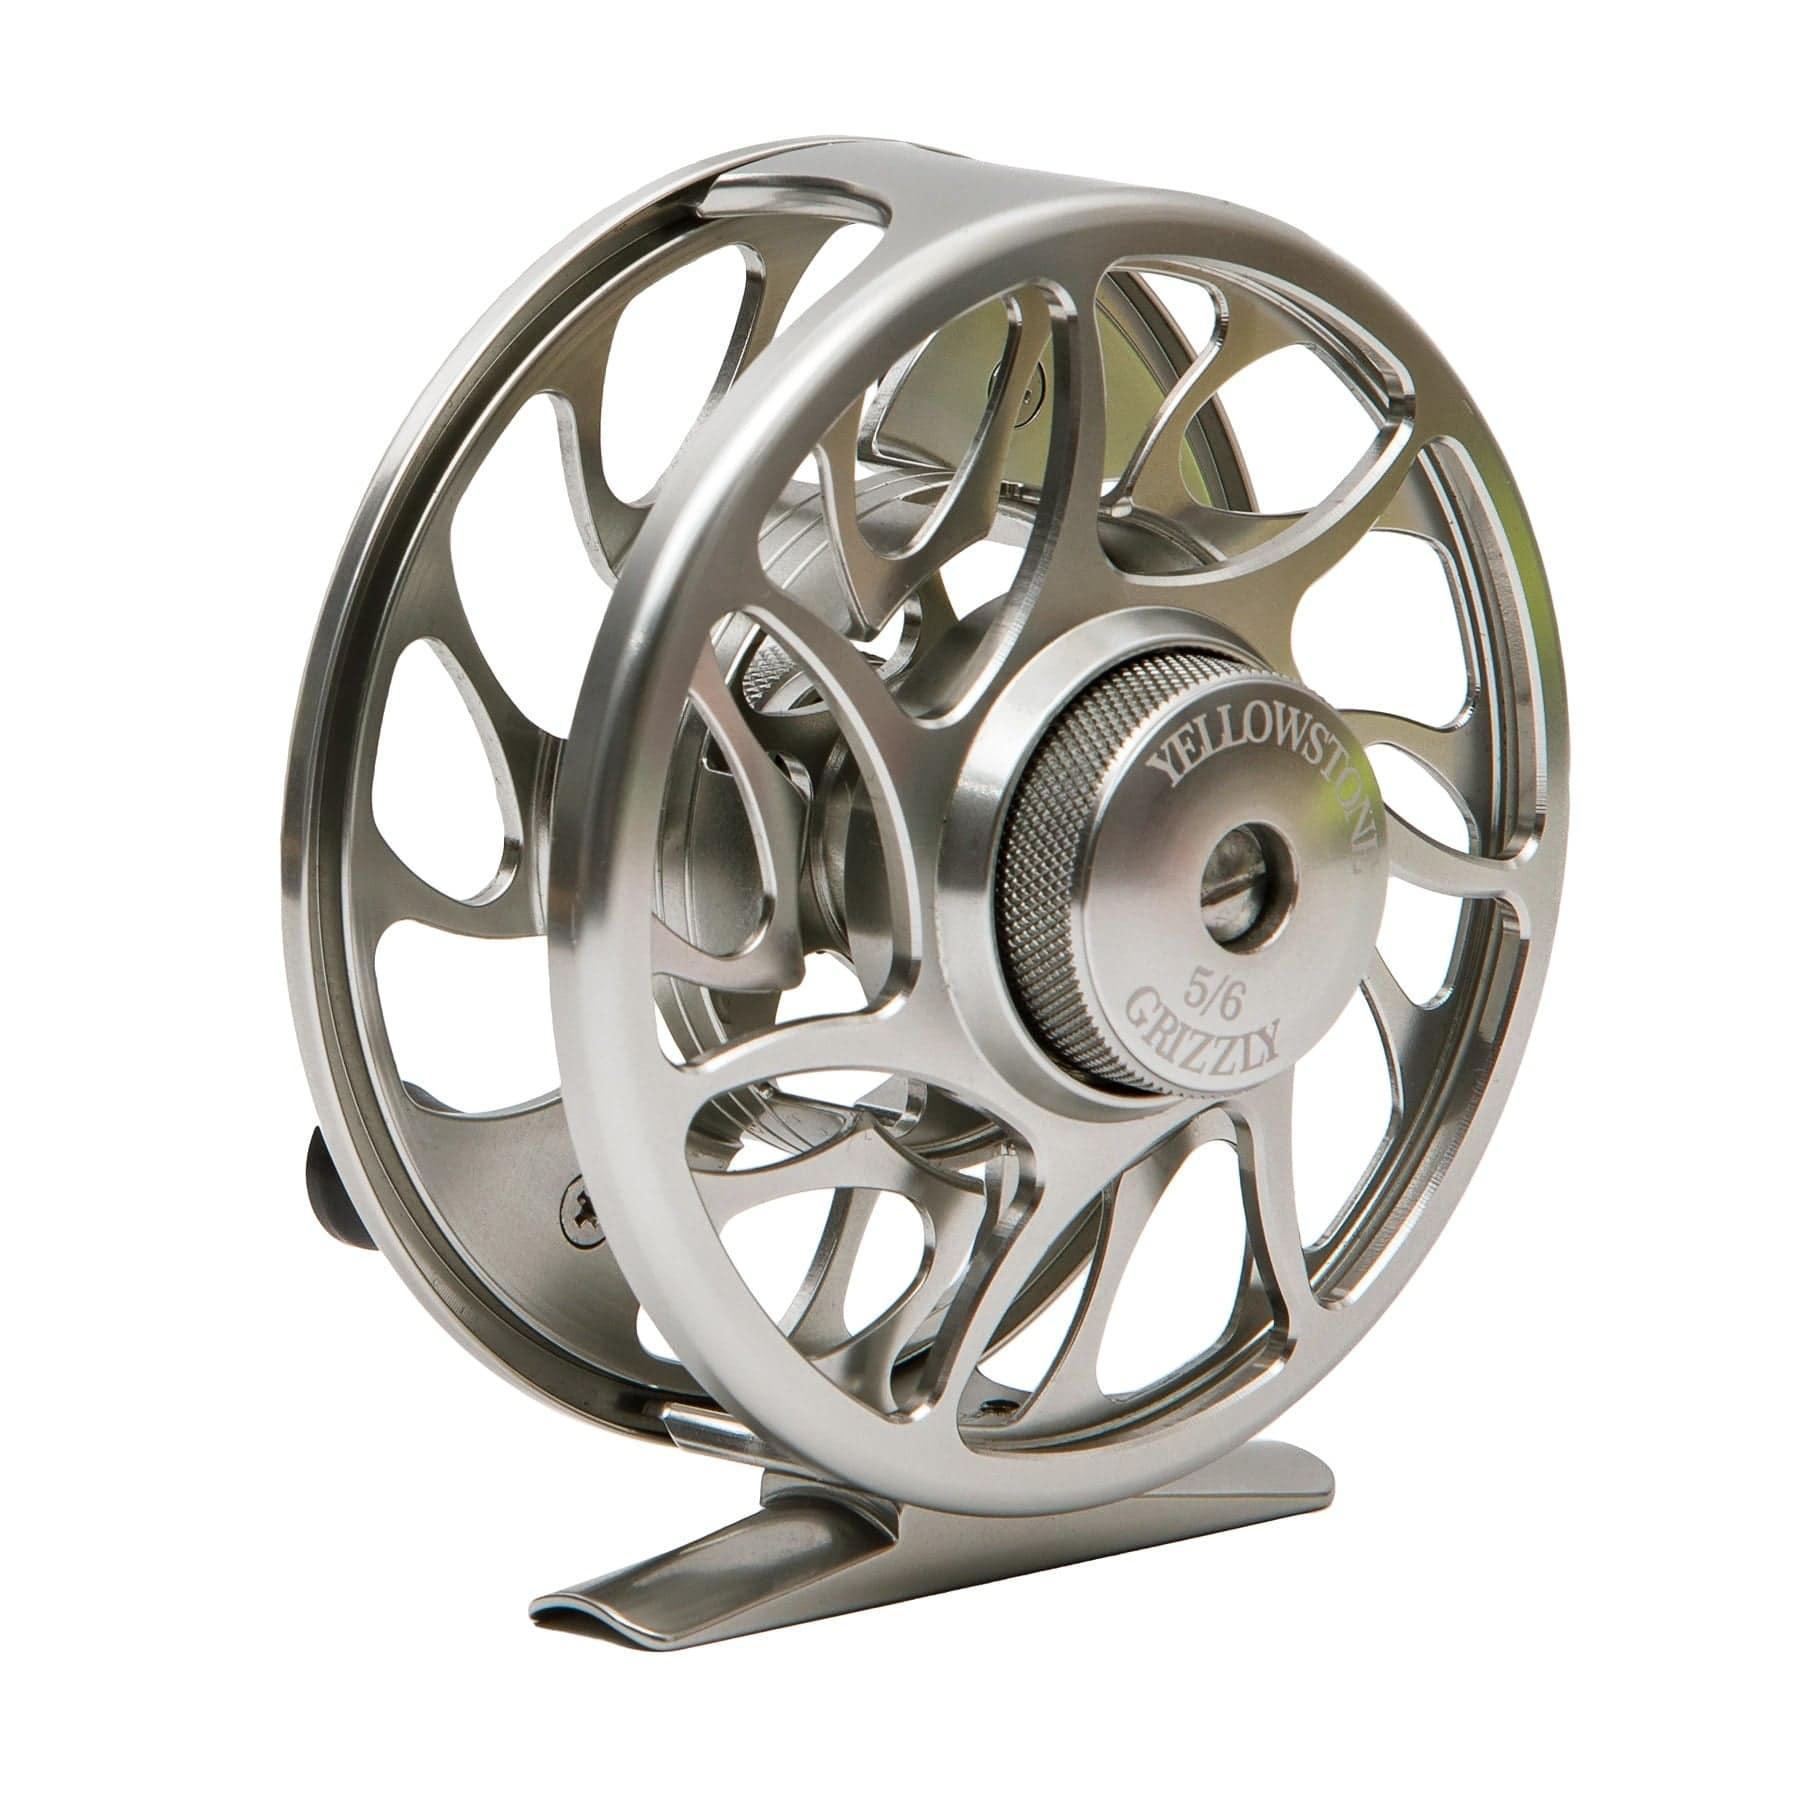 Yellowstone Grizzly Fly Reel - 5/6wt / Gray